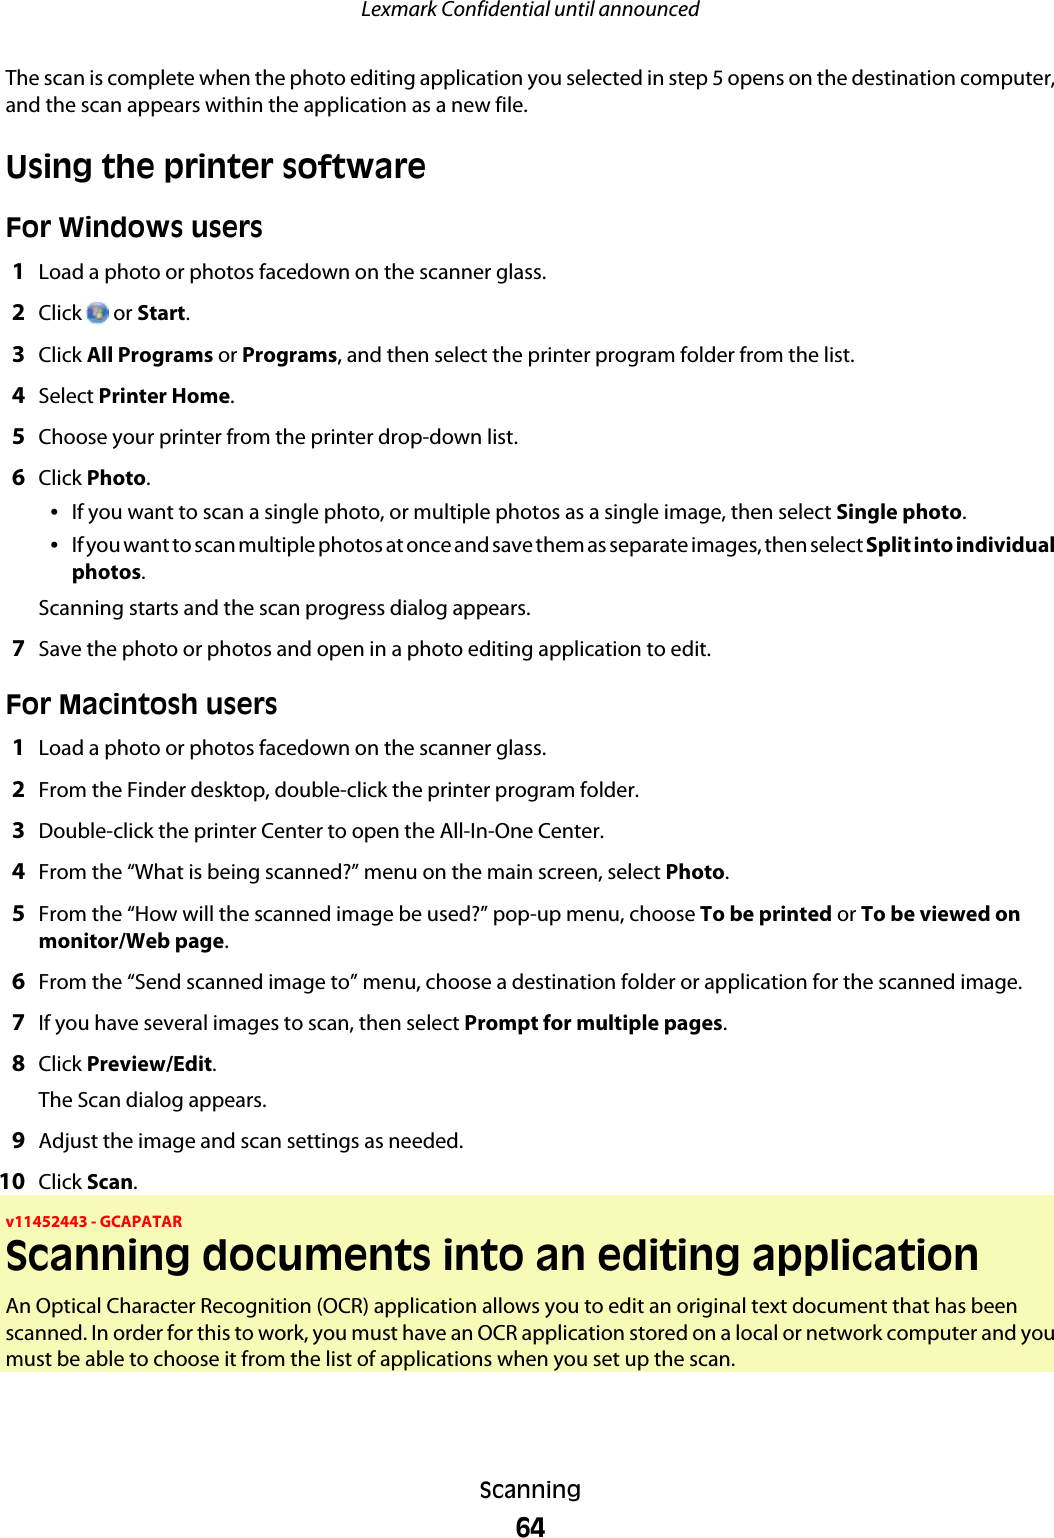 The scan is complete when the photo editing application you selected in step 5 opens on the destination computer,and the scan appears within the application as a new file.Using the printer softwareFor Windows users1Load a photo or photos facedown on the scanner glass.2Click   or Start.3Click All Programs or Programs, and then select the printer program folder from the list.4Select Printer Home.5Choose your printer from the printer drop-down list.6Click Photo.•If you want to scan a single photo, or multiple photos as a single image, then select Single photo.•If you want to scan multiple photos at once and save them as separate images, then select Split into individualphotos.Scanning starts and the scan progress dialog appears.7Save the photo or photos and open in a photo editing application to edit.For Macintosh users1Load a photo or photos facedown on the scanner glass.2From the Finder desktop, double-click the printer program folder.3Double-click the printer Center to open the All-In-One Center.4From the “What is being scanned?” menu on the main screen, select Photo.5From the “How will the scanned image be used?” pop-up menu, choose To be printed or To be viewed onmonitor/Web page.6From the “Send scanned image to” menu, choose a destination folder or application for the scanned image.7If you have several images to scan, then select Prompt for multiple pages.8Click Preview/Edit.The Scan dialog appears.9Adjust the image and scan settings as needed.10 Click Scan.v11452443 - GCAPATARScanning documents into an editing applicationAn Optical Character Recognition (OCR) application allows you to edit an original text document that has beenscanned. In order for this to work, you must have an OCR application stored on a local or network computer and youmust be able to choose it from the list of applications when you set up the scan.Lexmark Confidential until announcedScanning64